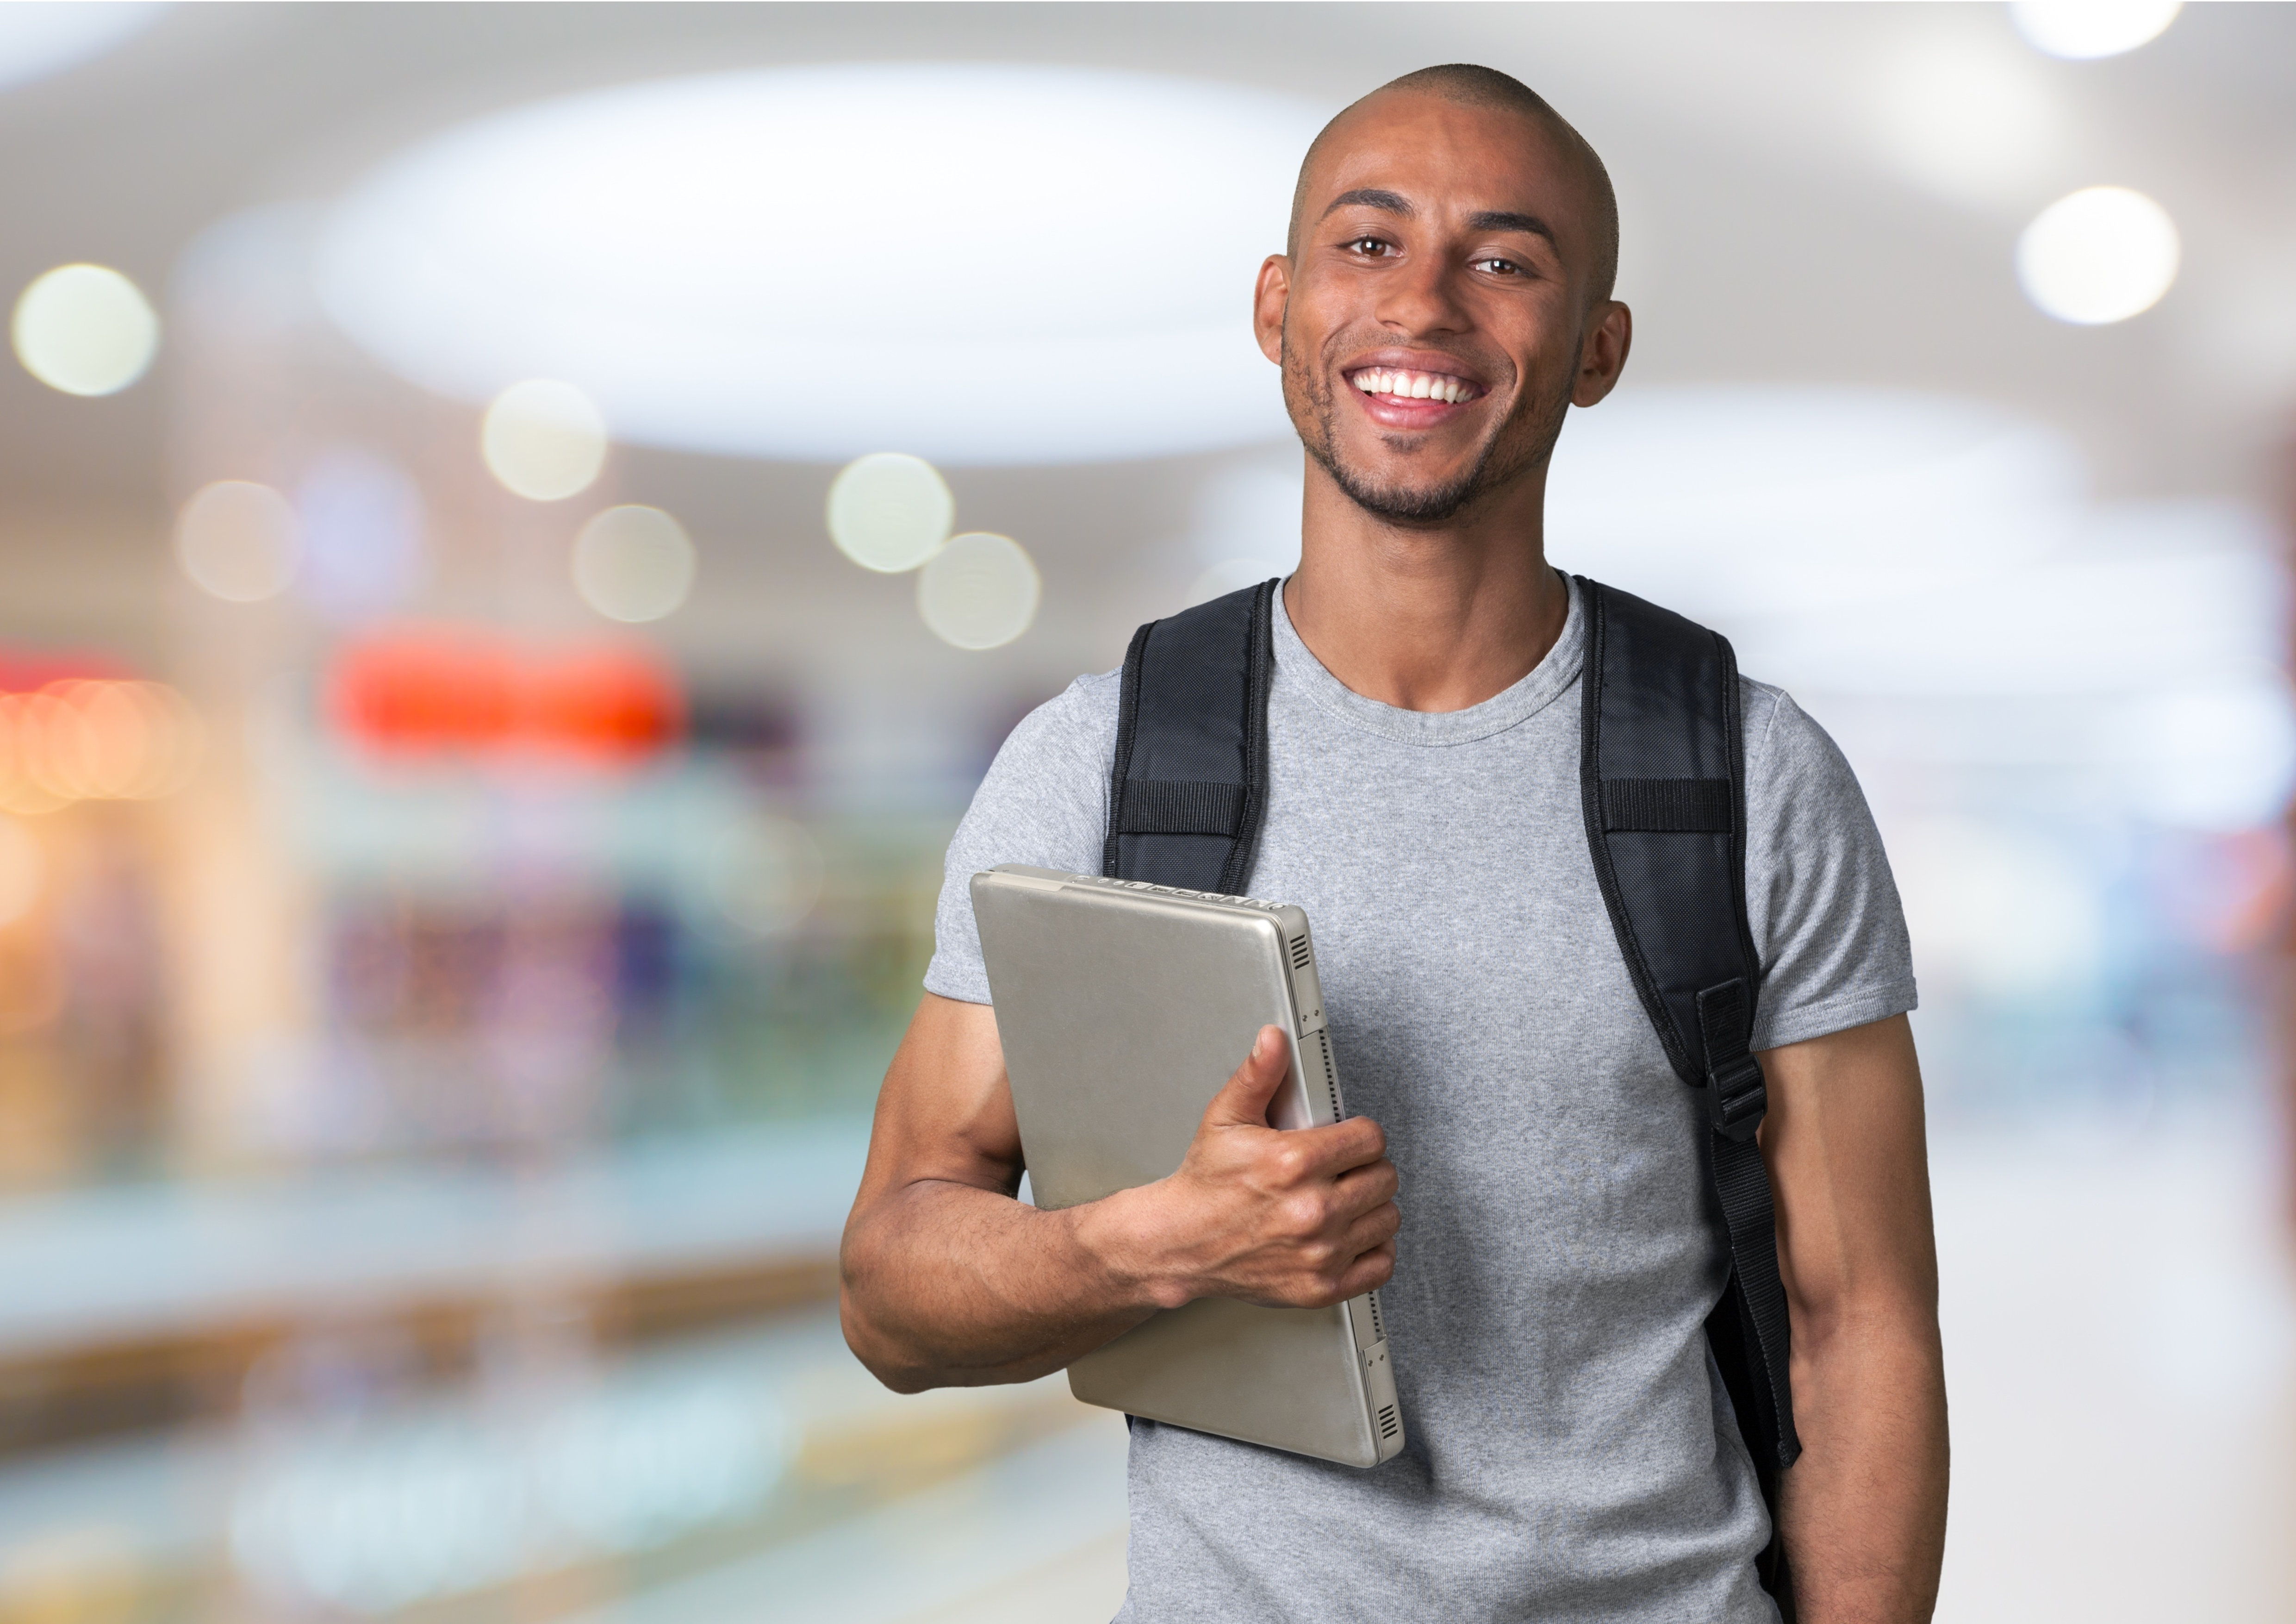 An image of a smiling male student